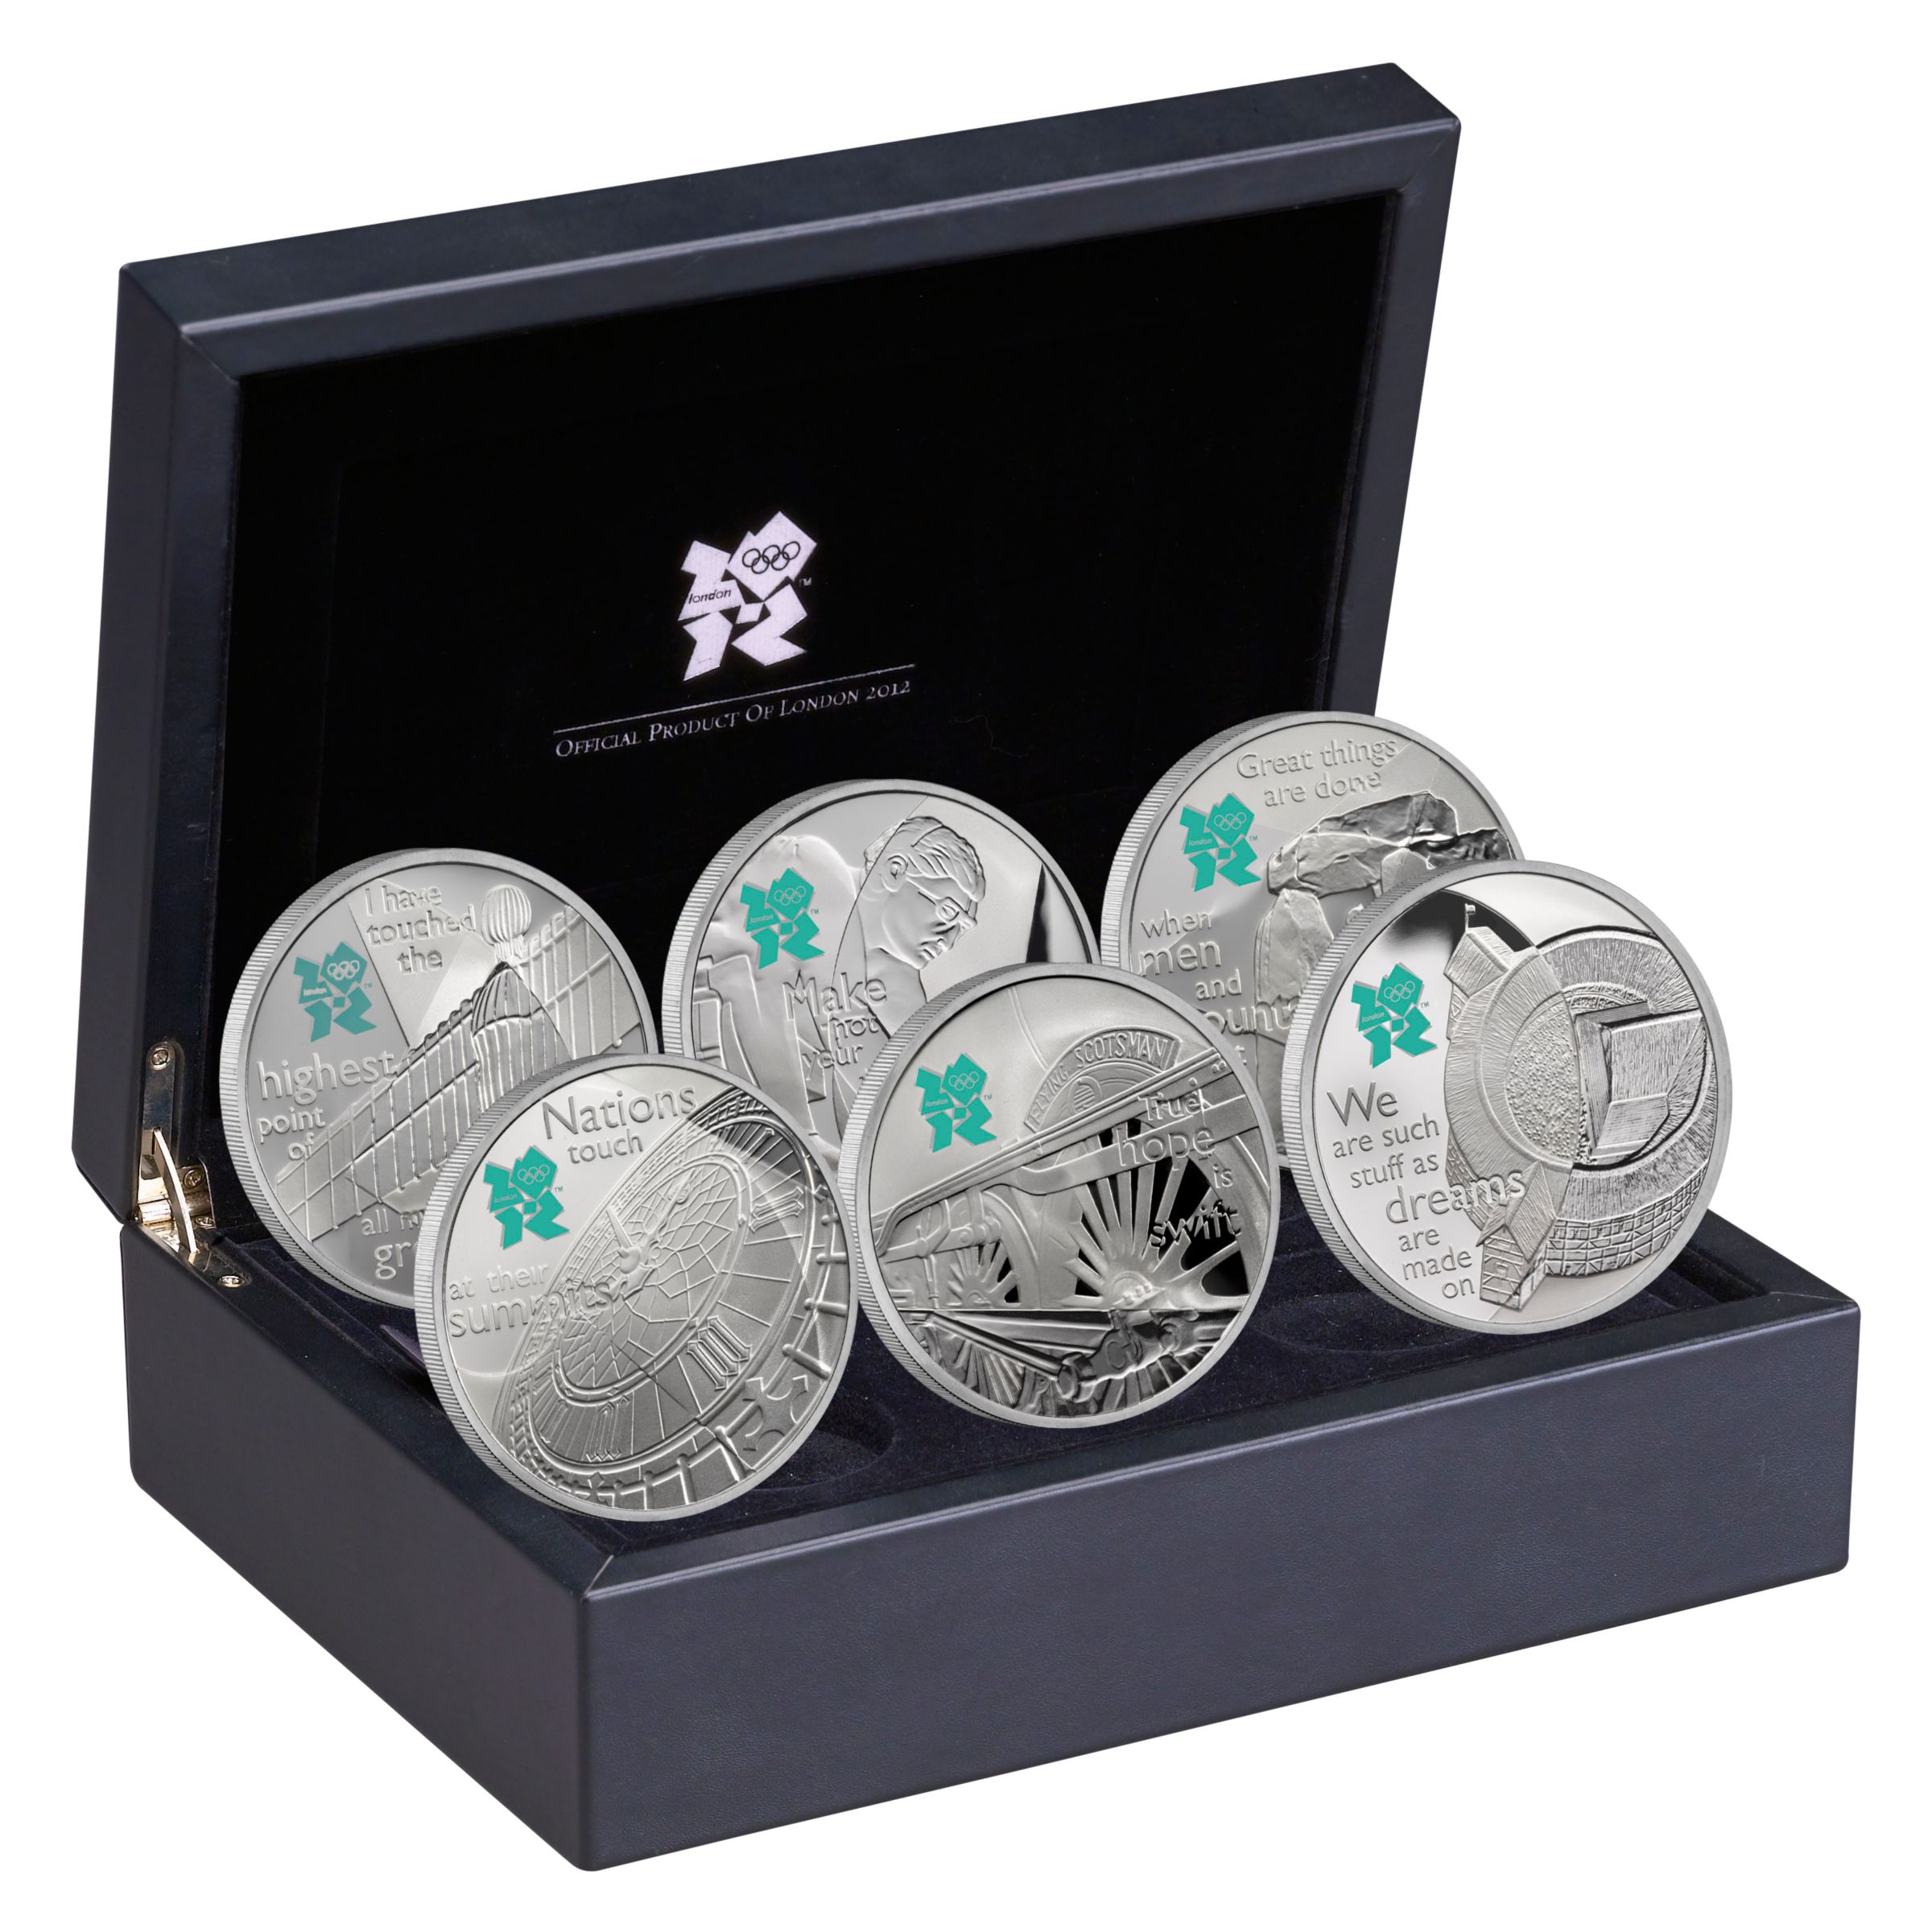 Royal Mint London 2012 Olympic Games, The Mind Collection of Coins, Set of 6 at John Lewis